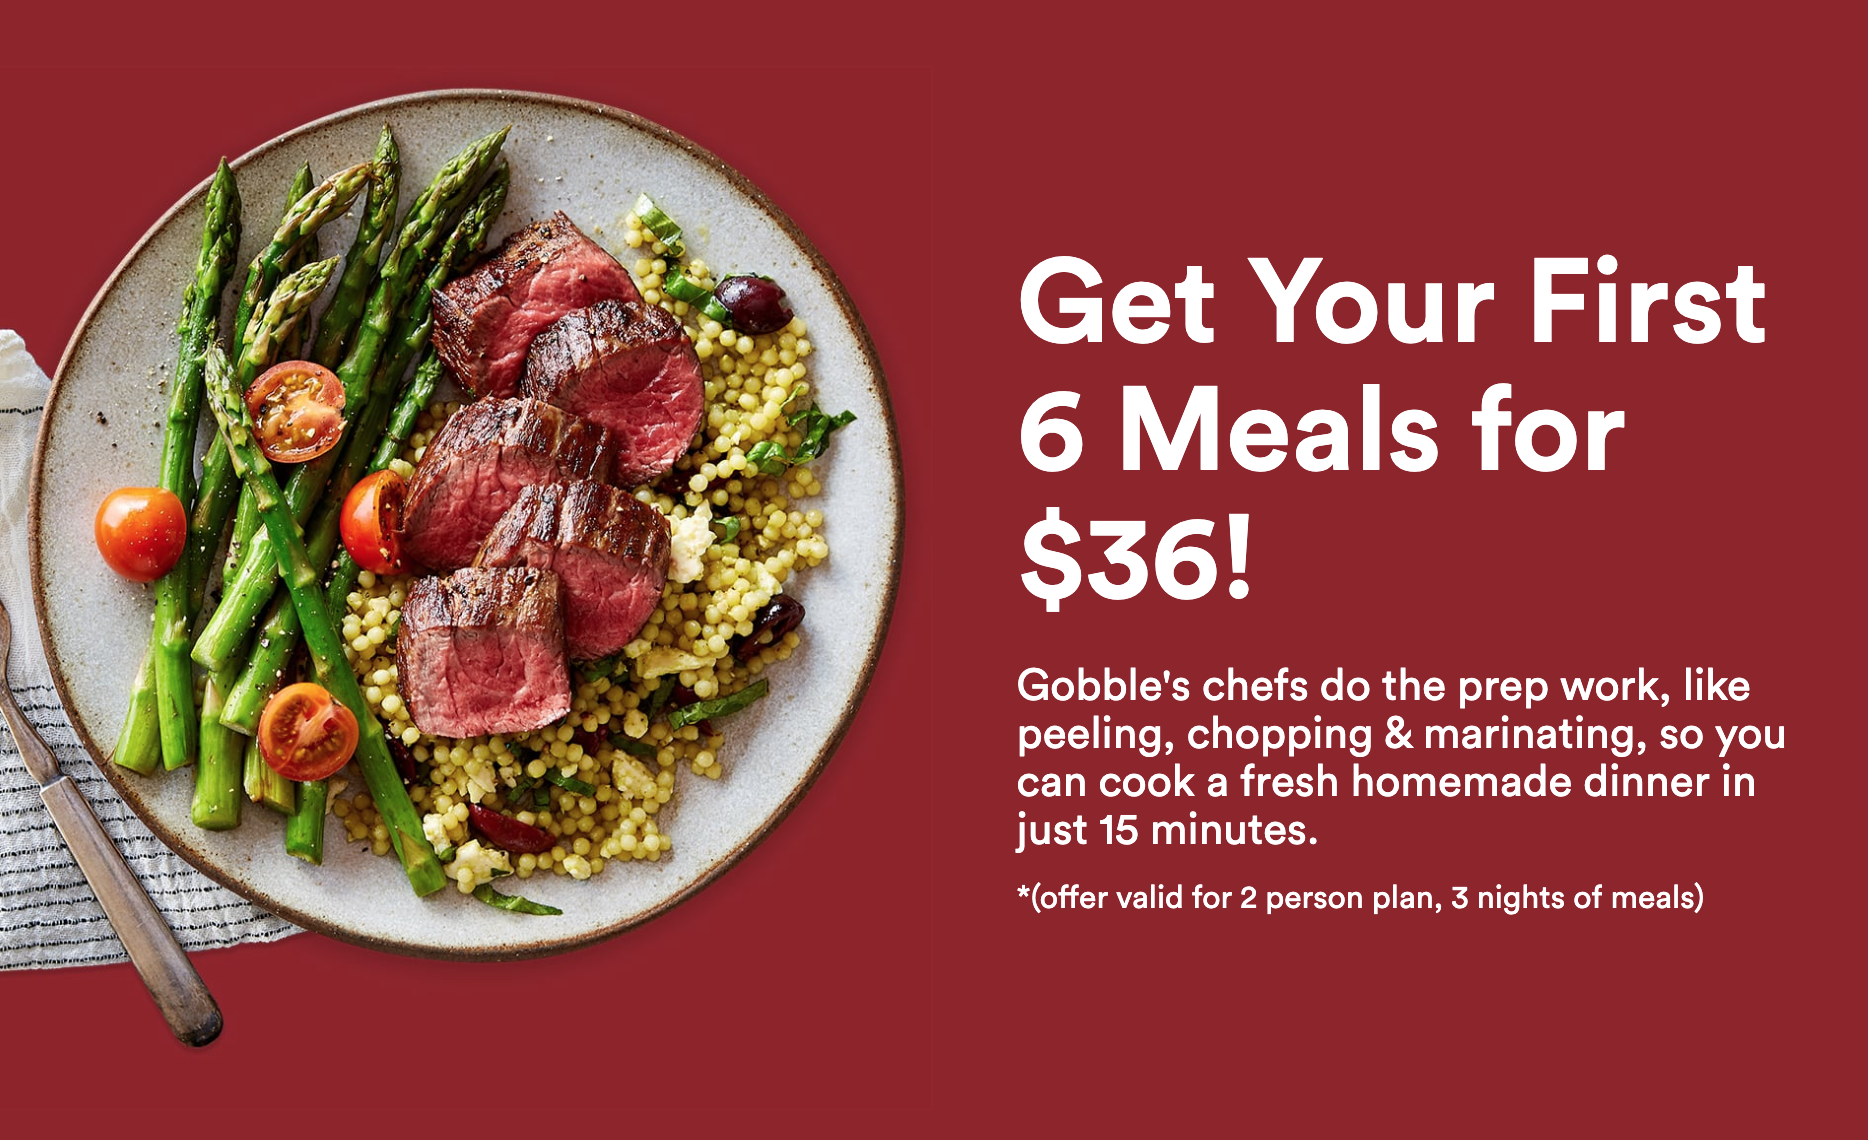 Gobble Meal Kit Deal – Get 6 Meals for $36!